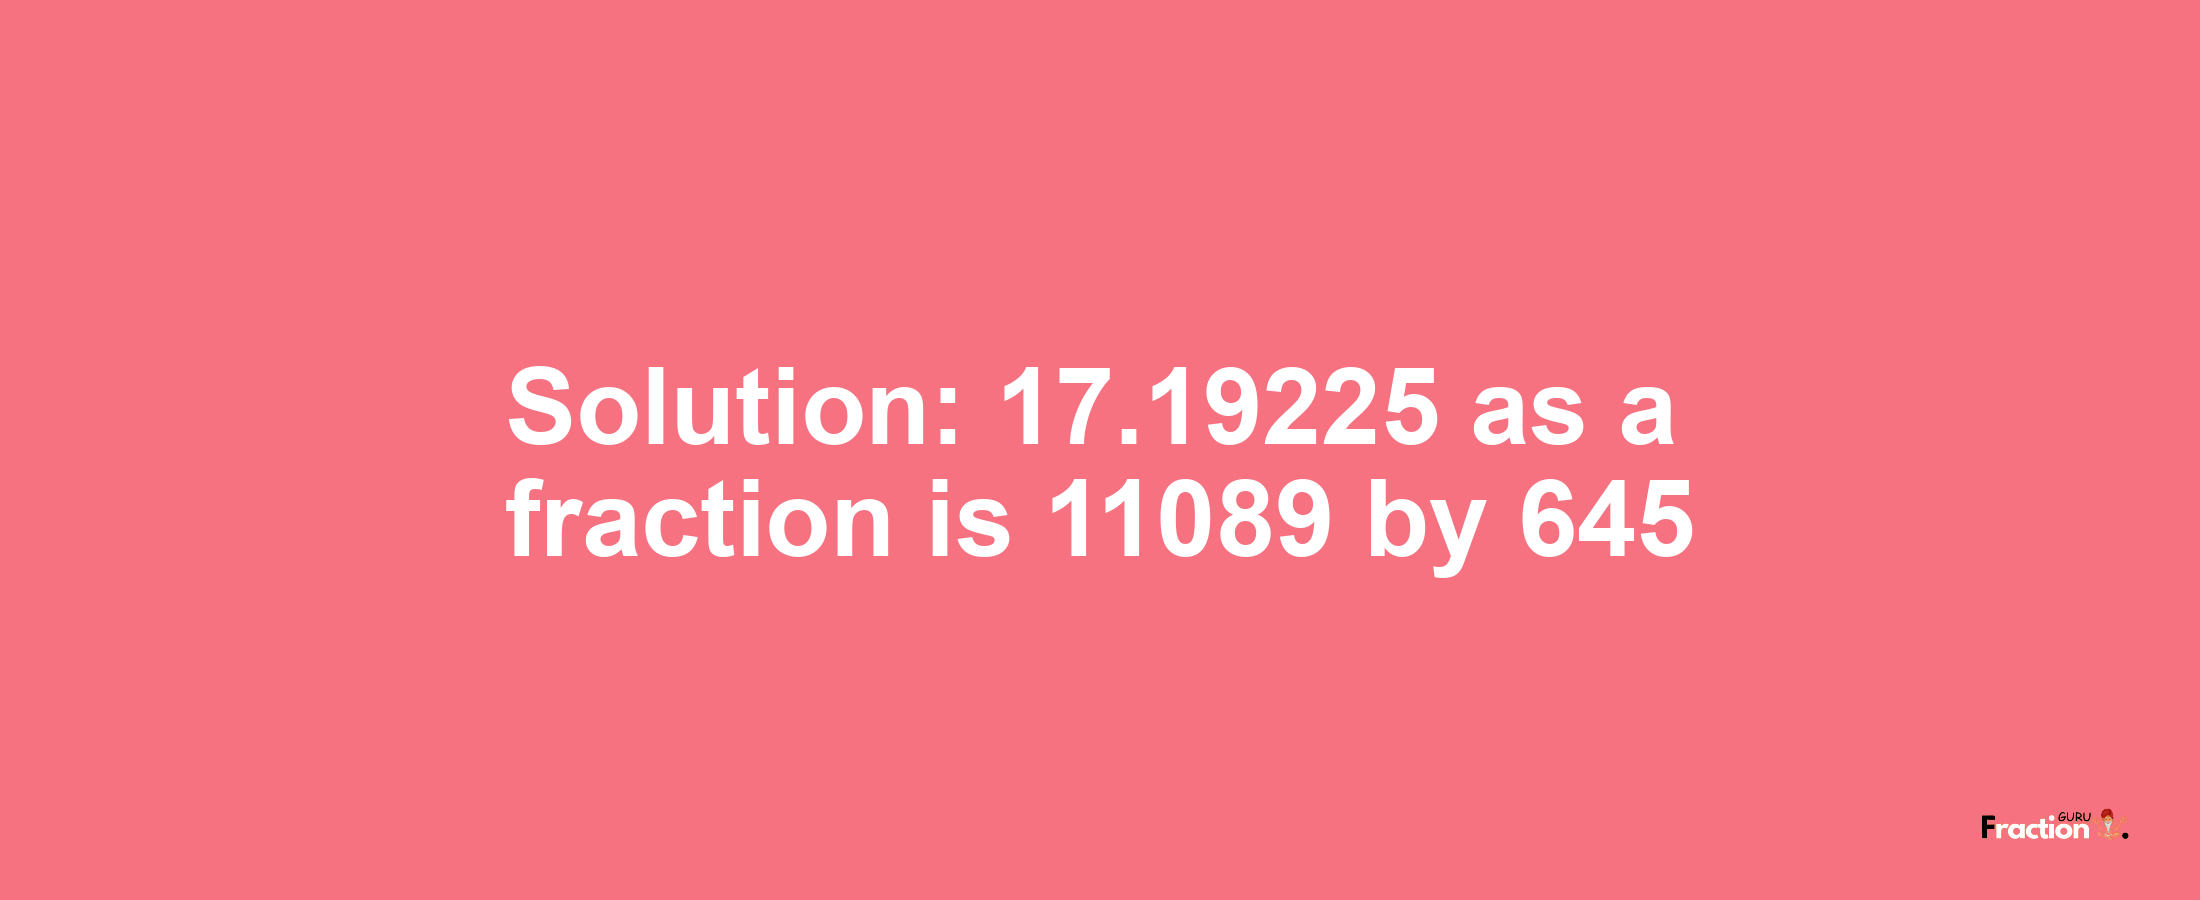 Solution:17.19225 as a fraction is 11089/645